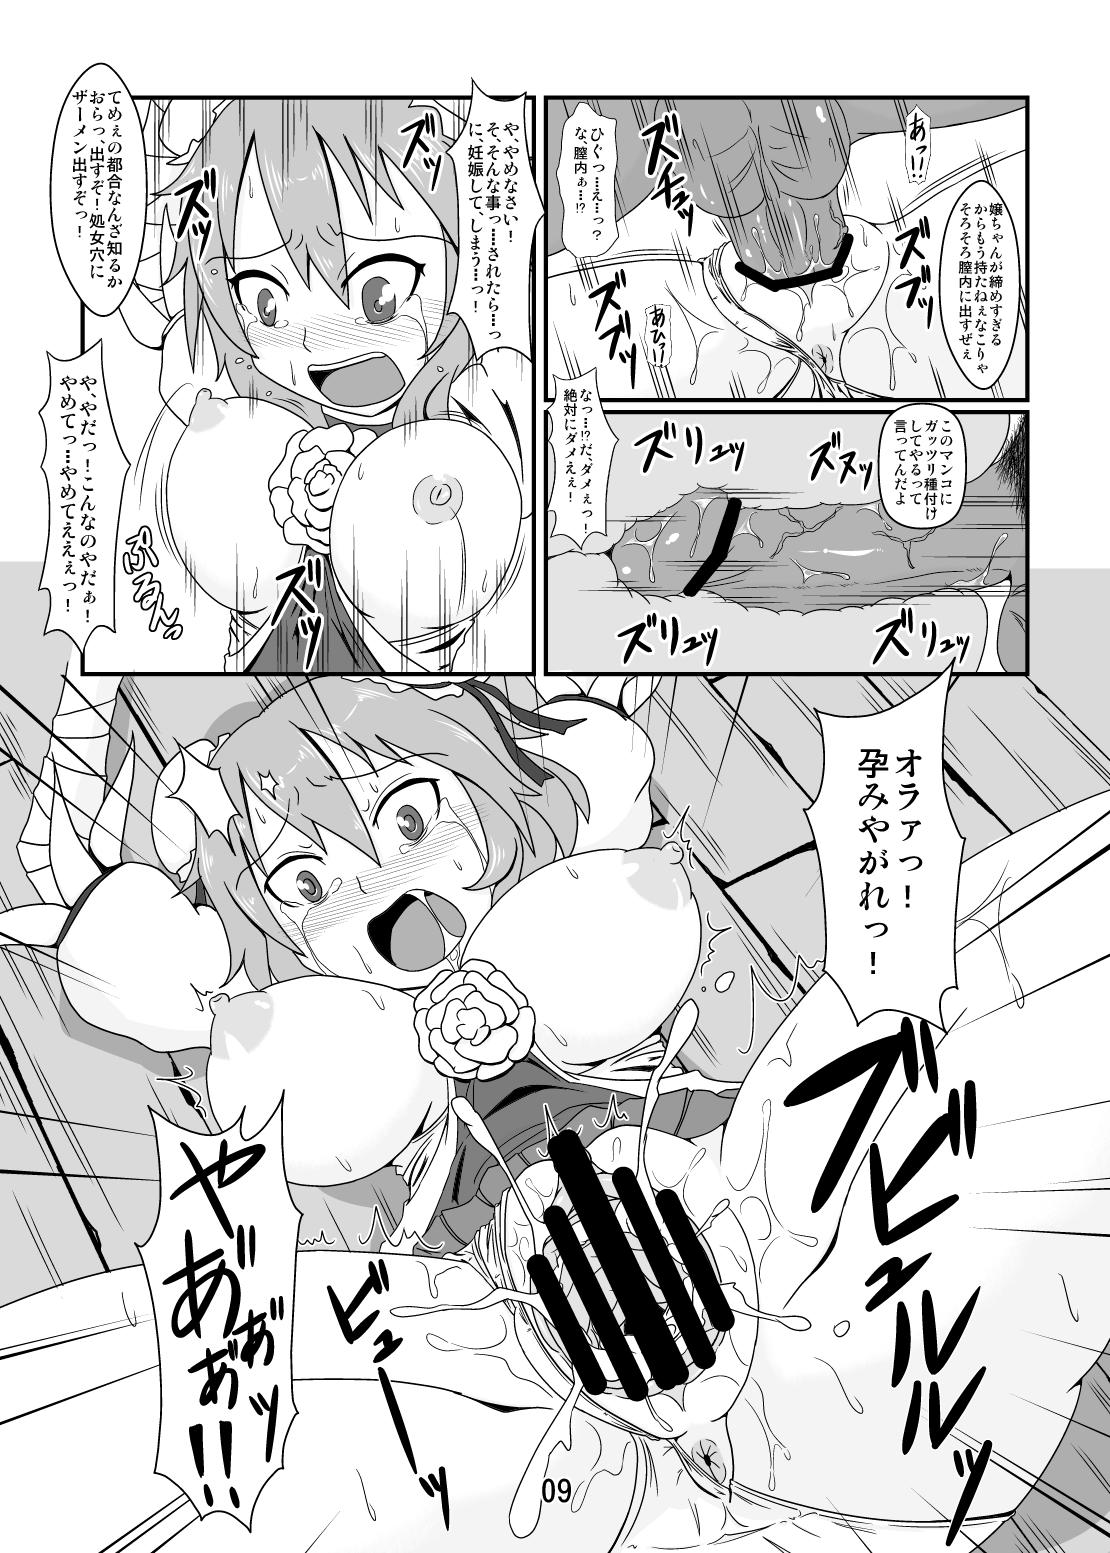 Prima 可哀想な華仙ちゃん - Touhou project Baile - Page 8